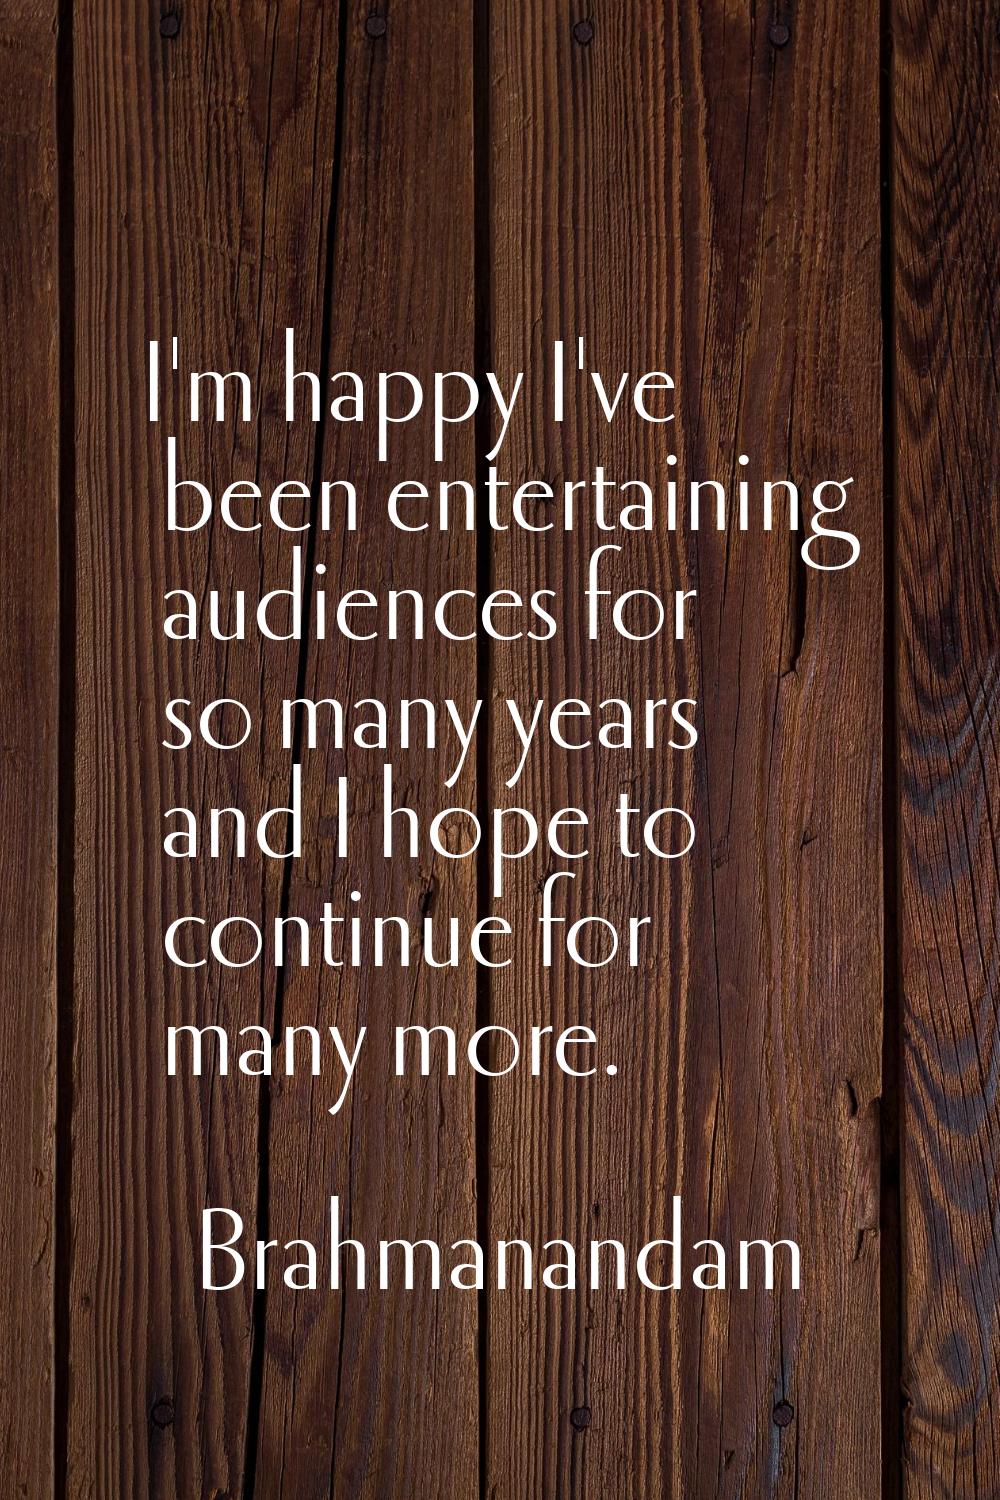 I'm happy I've been entertaining audiences for so many years and I hope to continue for many more.